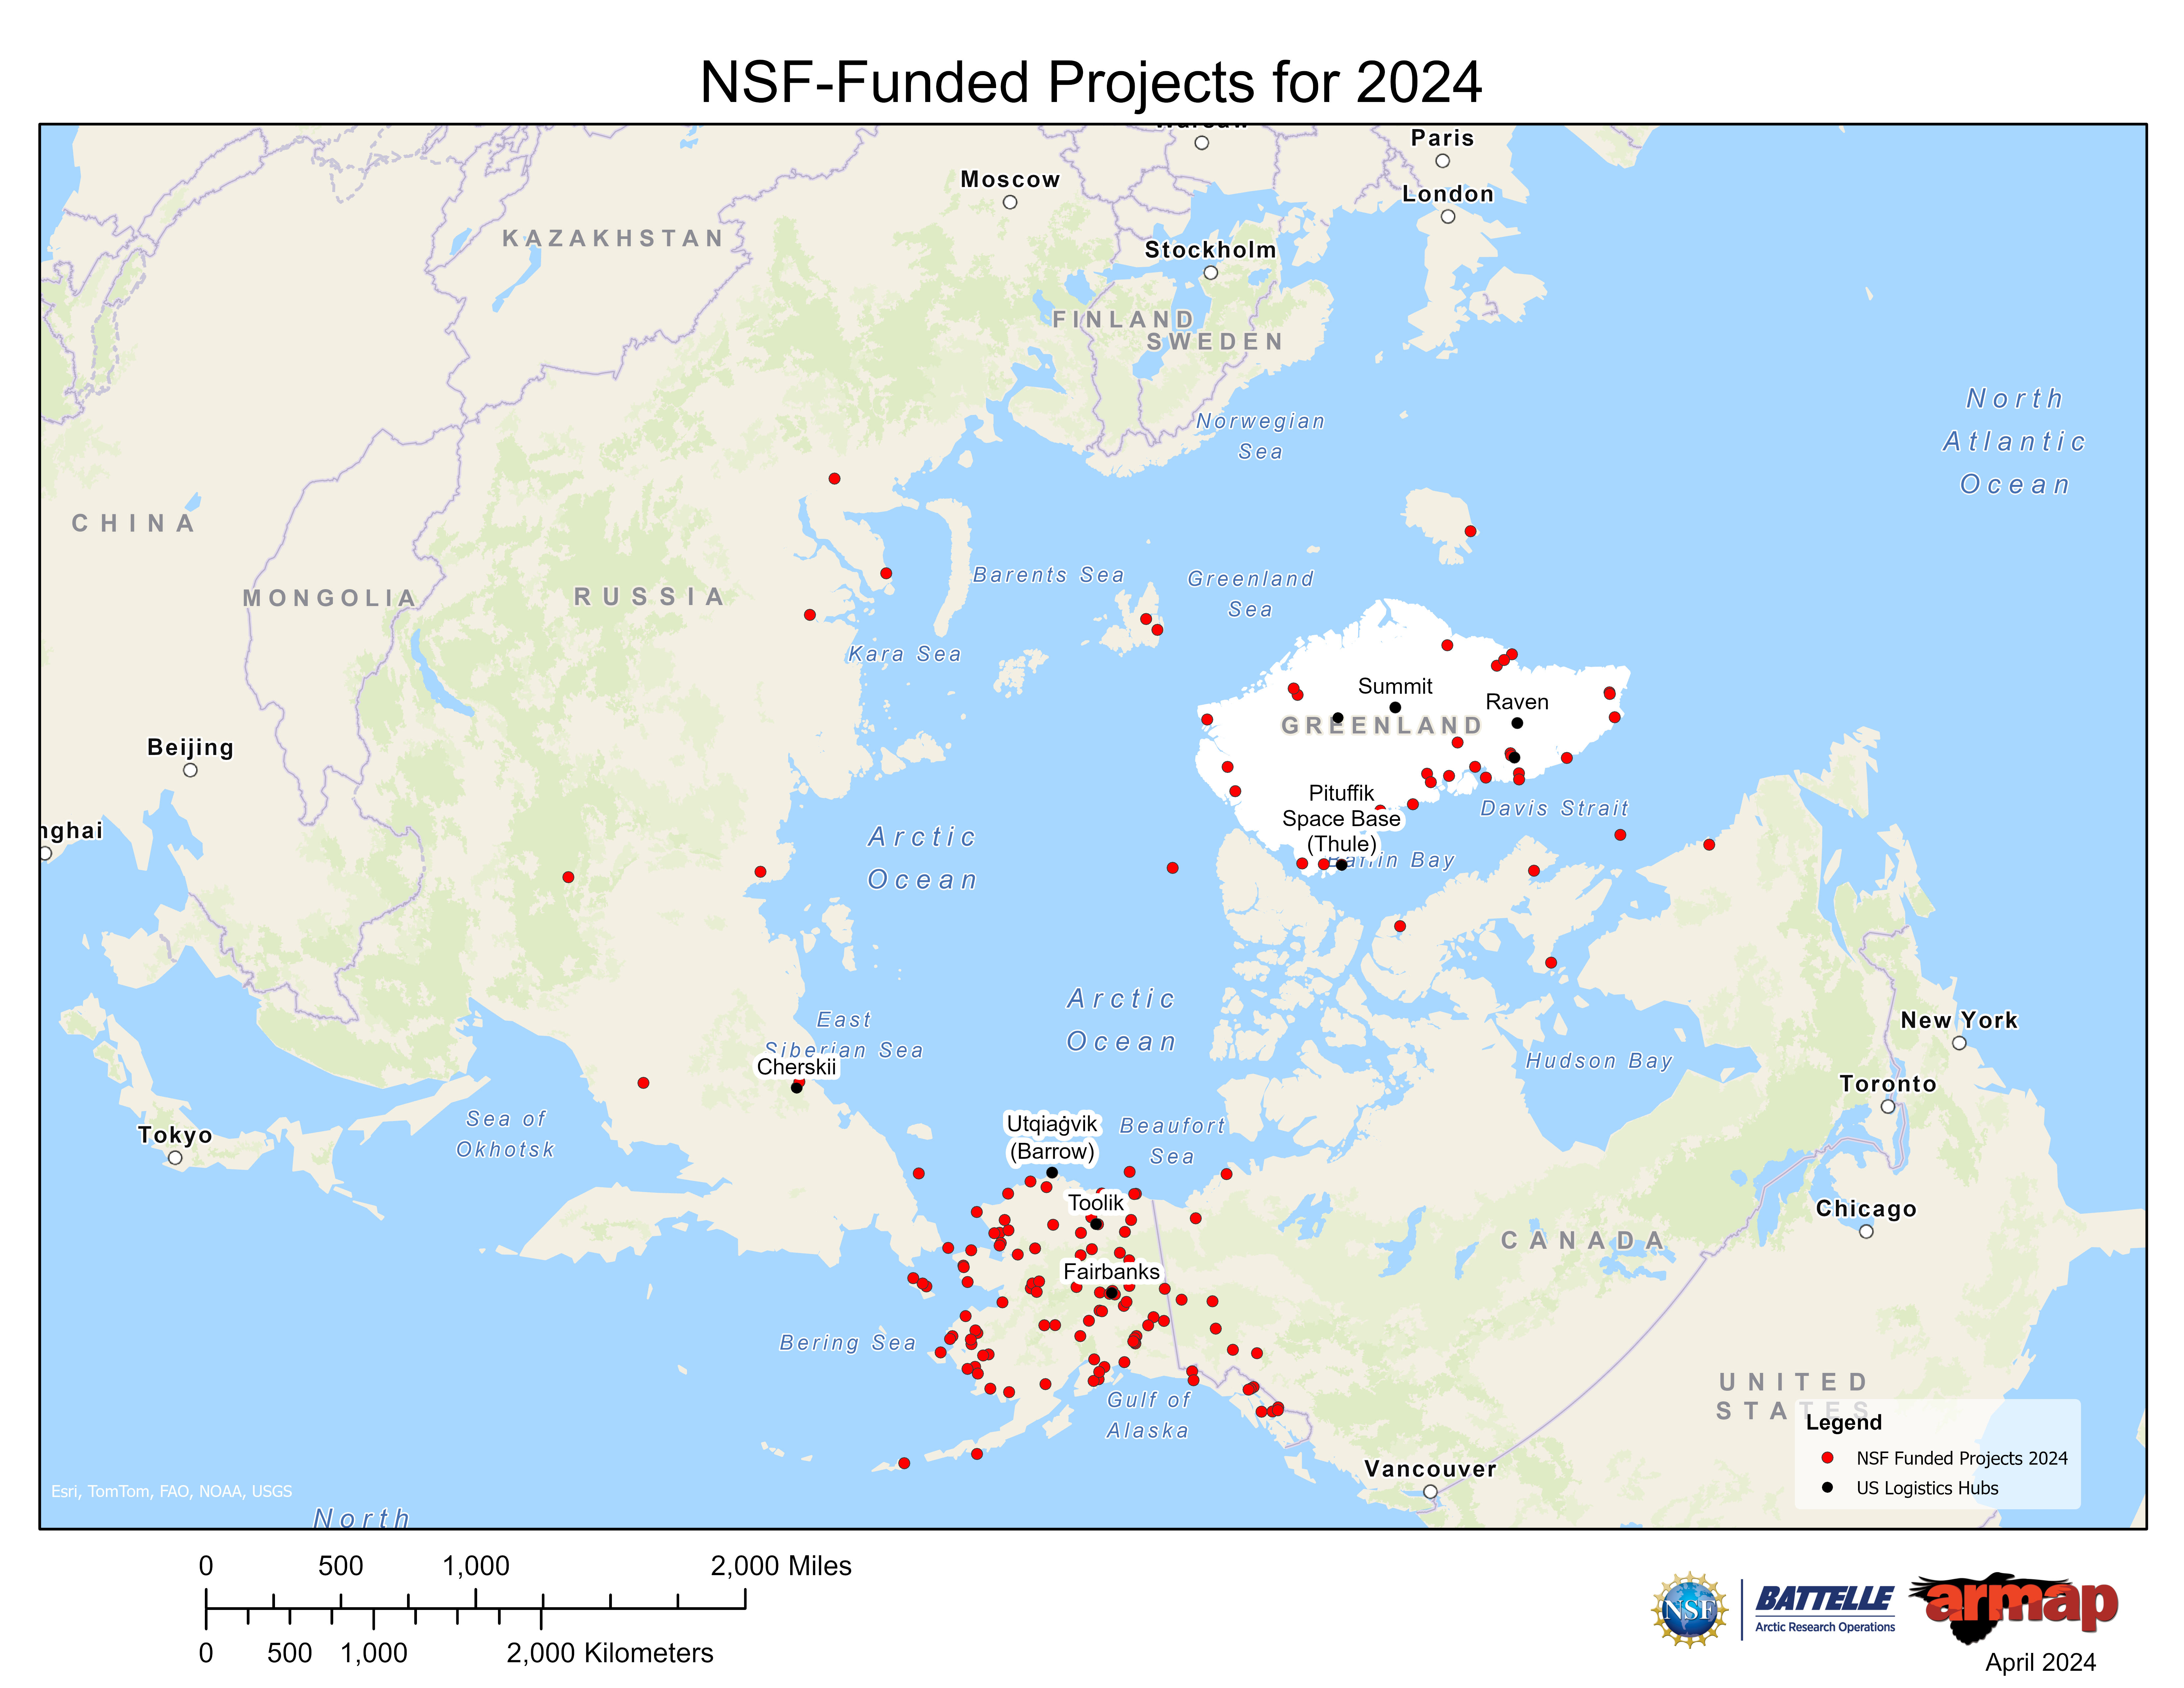 NSF-Funded Projects This Year